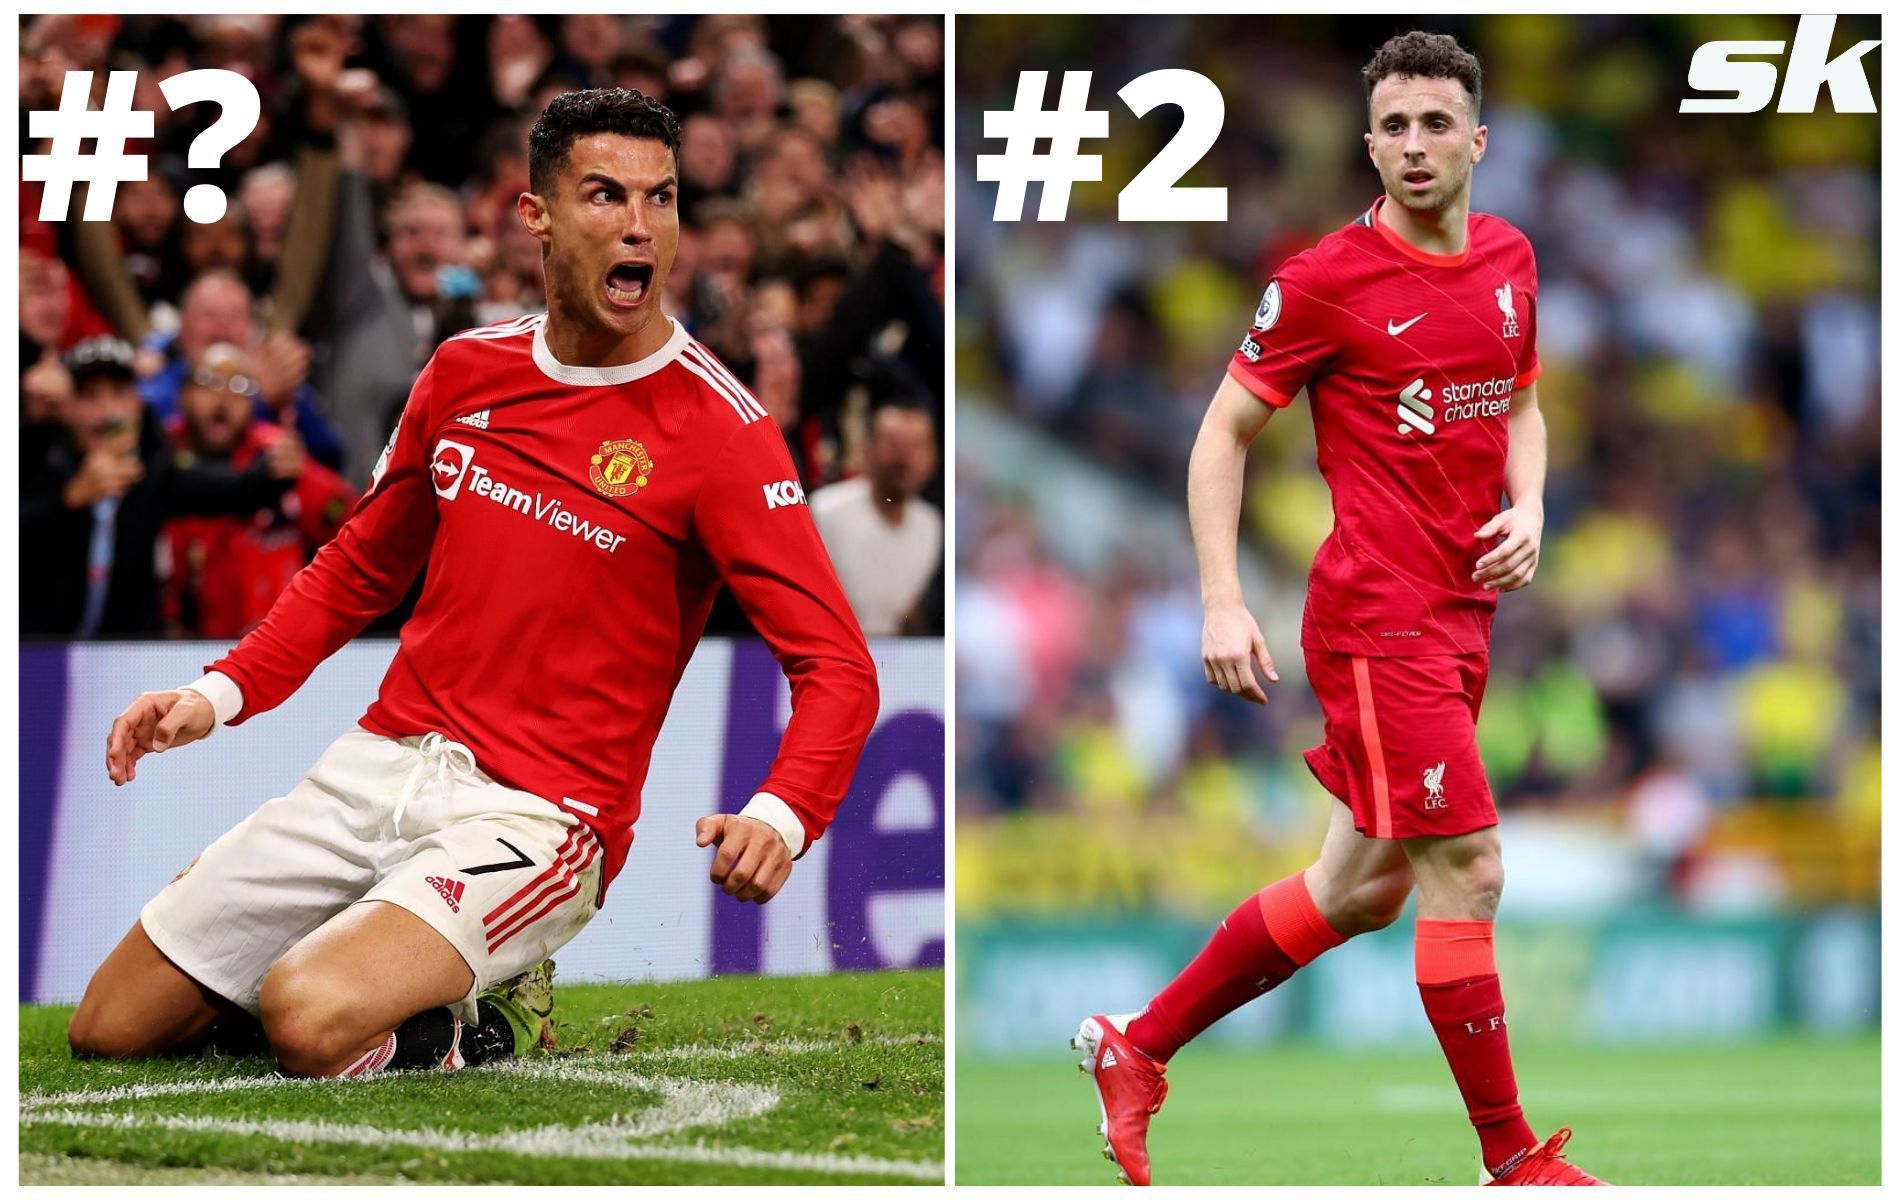 Who has been the best Portuguese player in the Premier League this term?